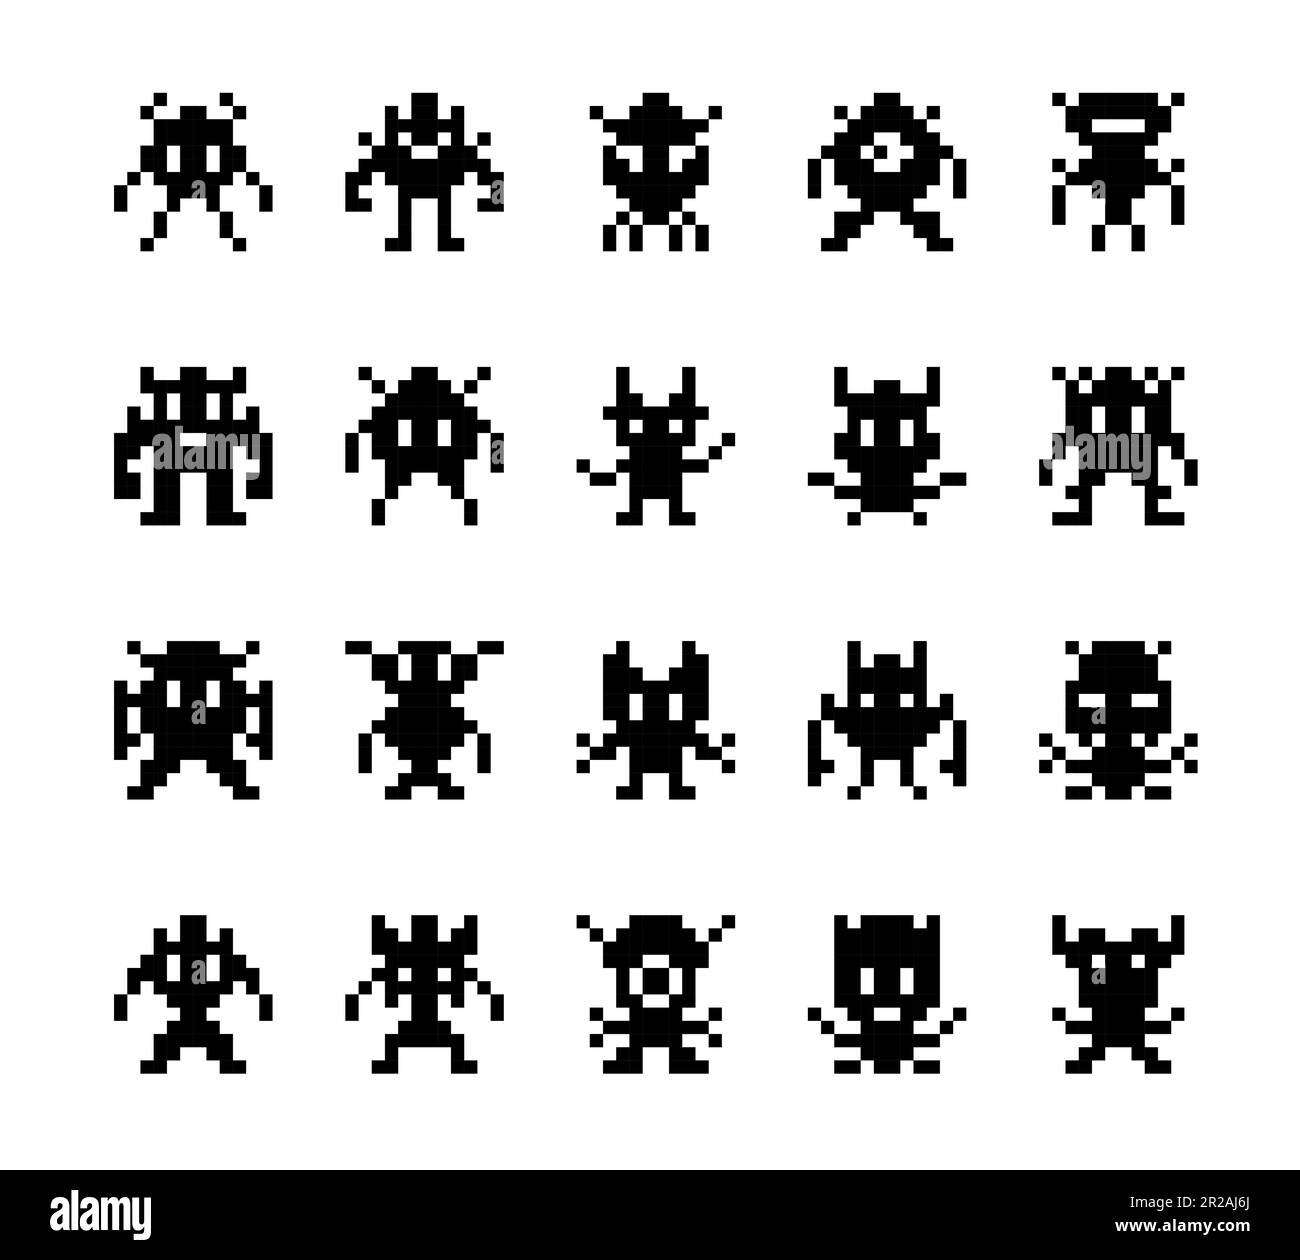 Pixel monsters, arcade game characters. Isolated vector set of funny creatures in pixel art style. Vintage 8-bit graphic silhouettes. Retro video game icons. Black simple aliens on white background Stock Vector